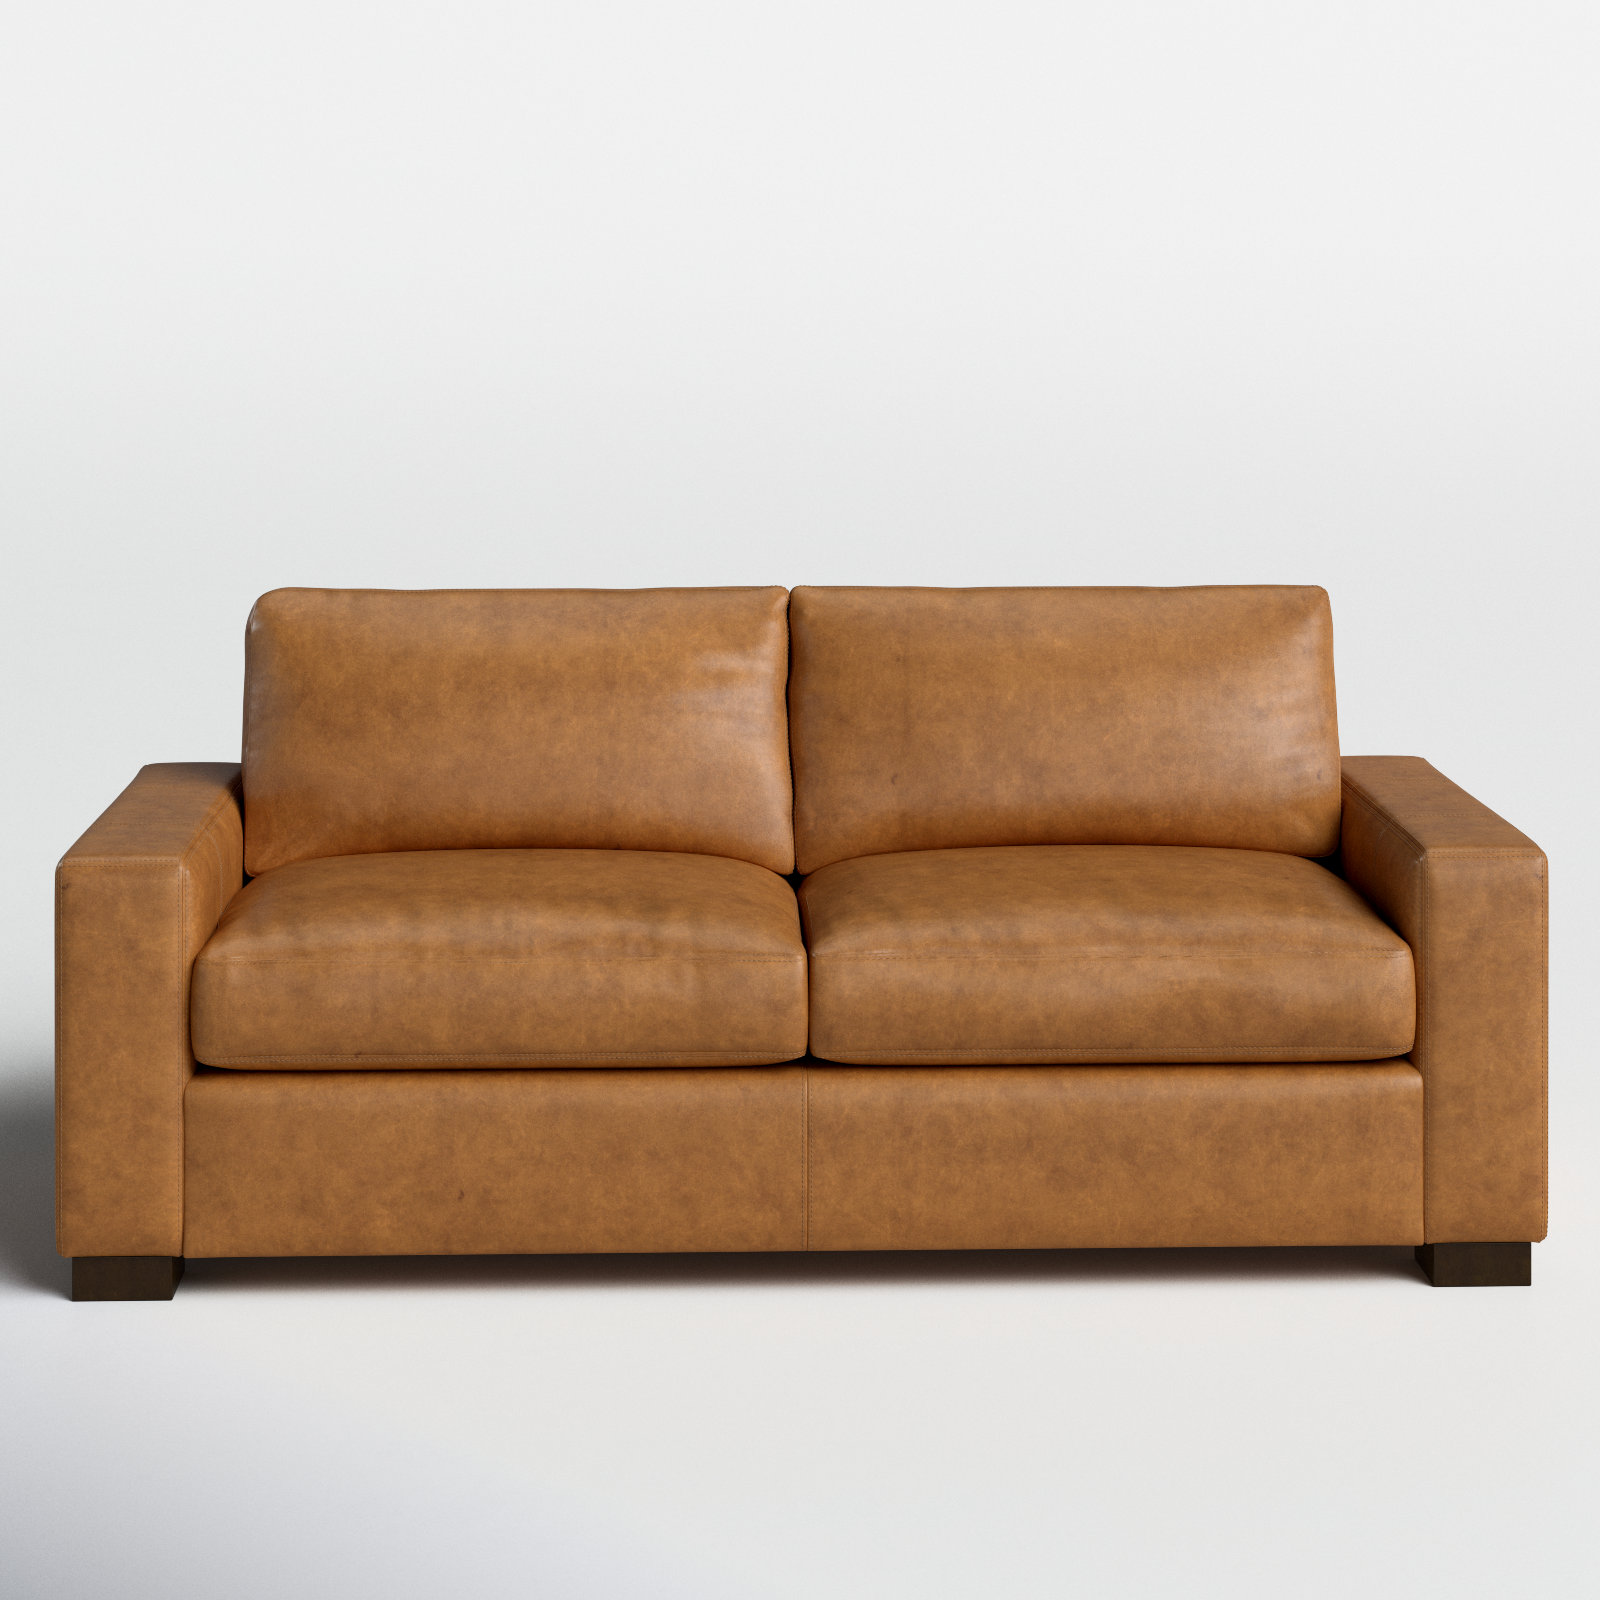 Best Leather Cleaner For Sofas - Revive Your Sofa's Beauty 